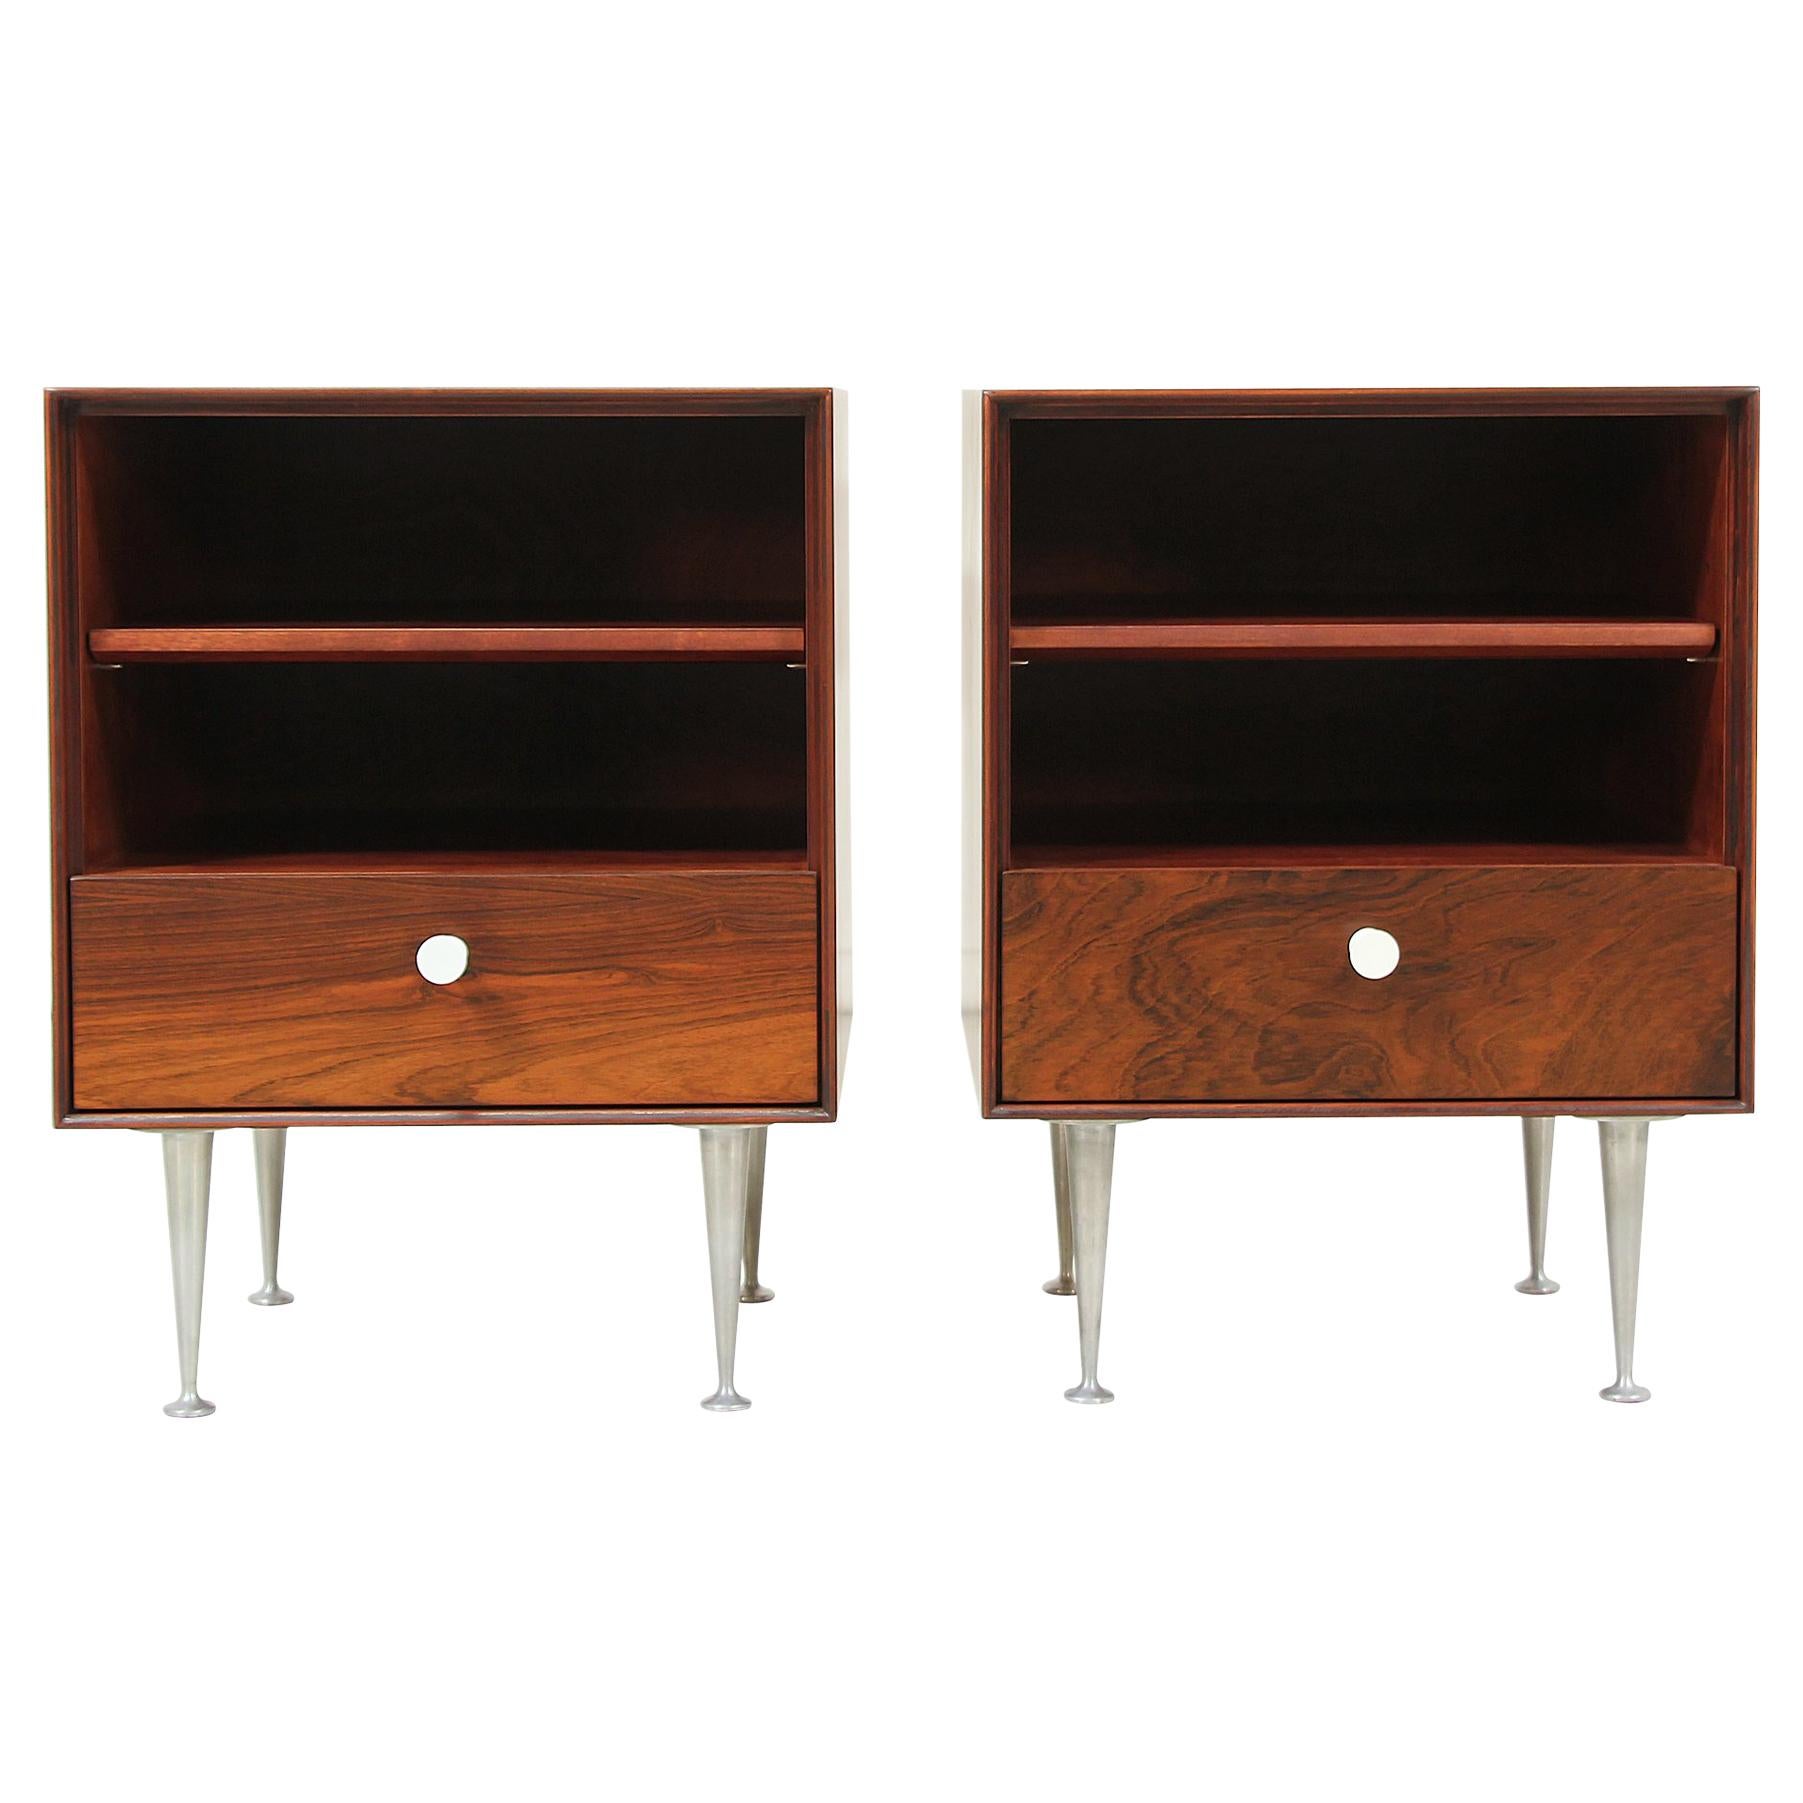 George Nelson 'Thin Edge' Rosewood Night Stands for Herman Miller